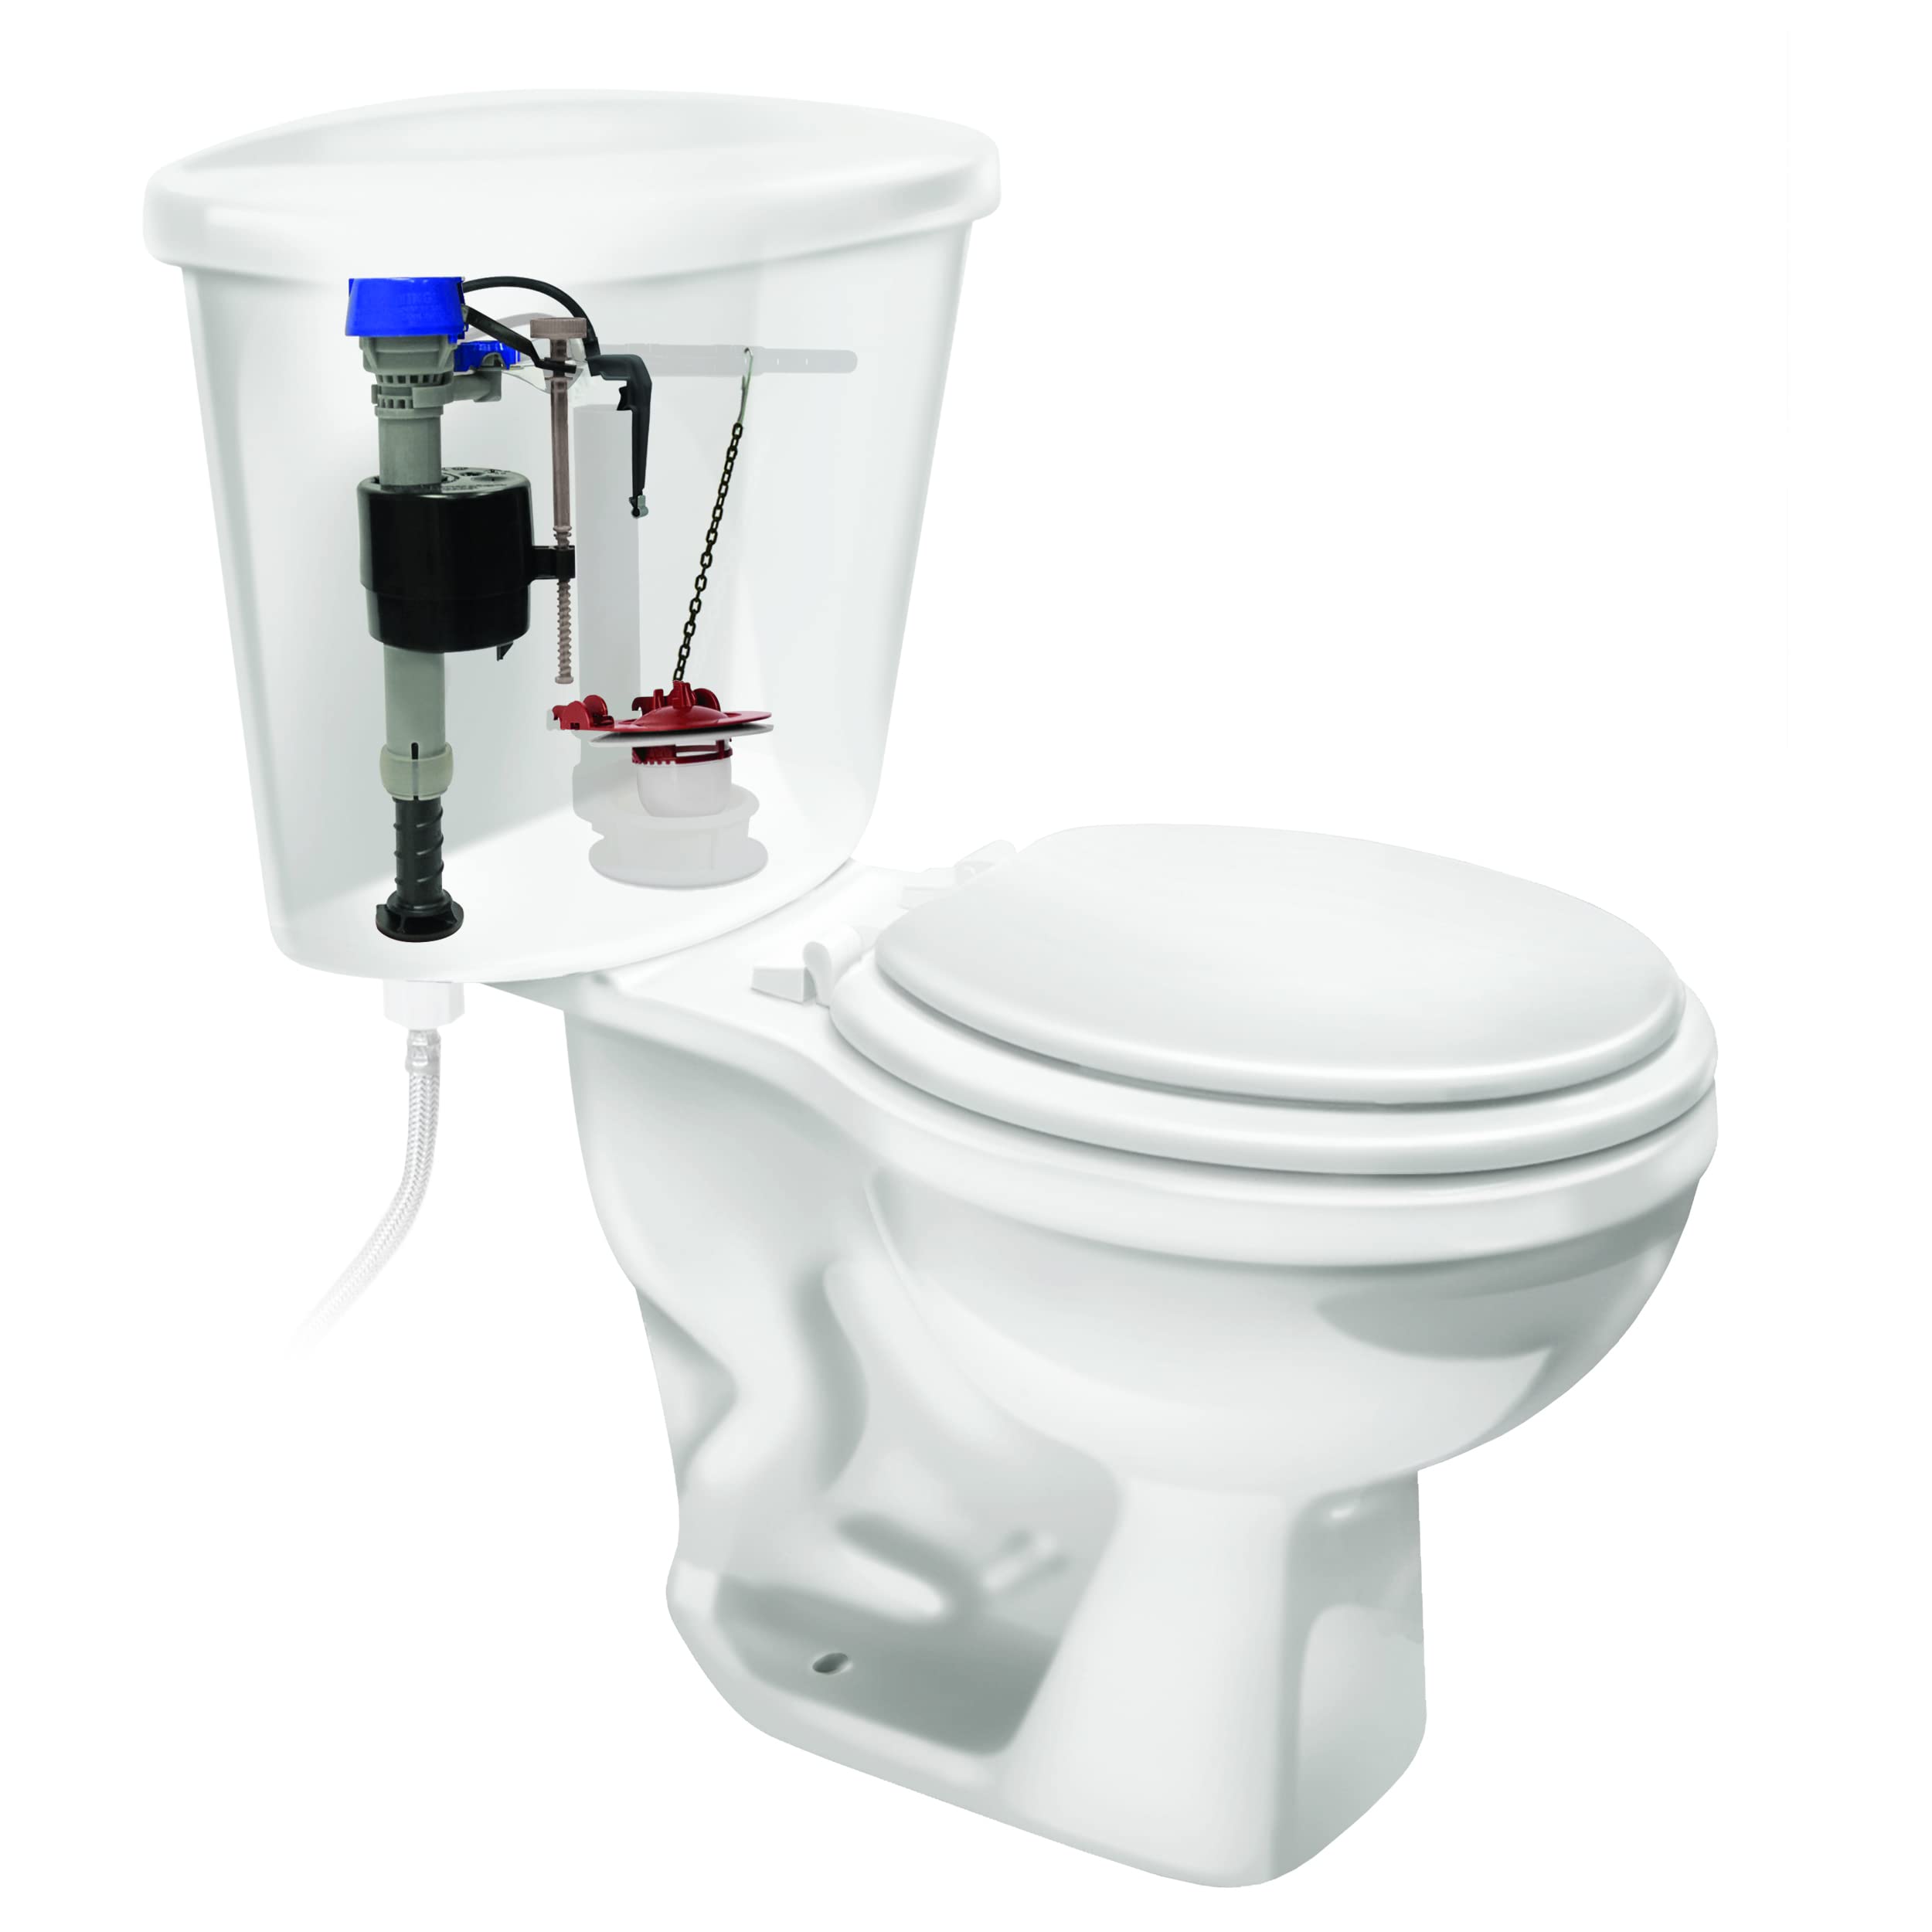 Fluidmaster K-400H-040-T5 PerforMAX Fill Valve and 3-Inch Flapper Toilet Repair Kit, Universal, for 3 In, Multicolor